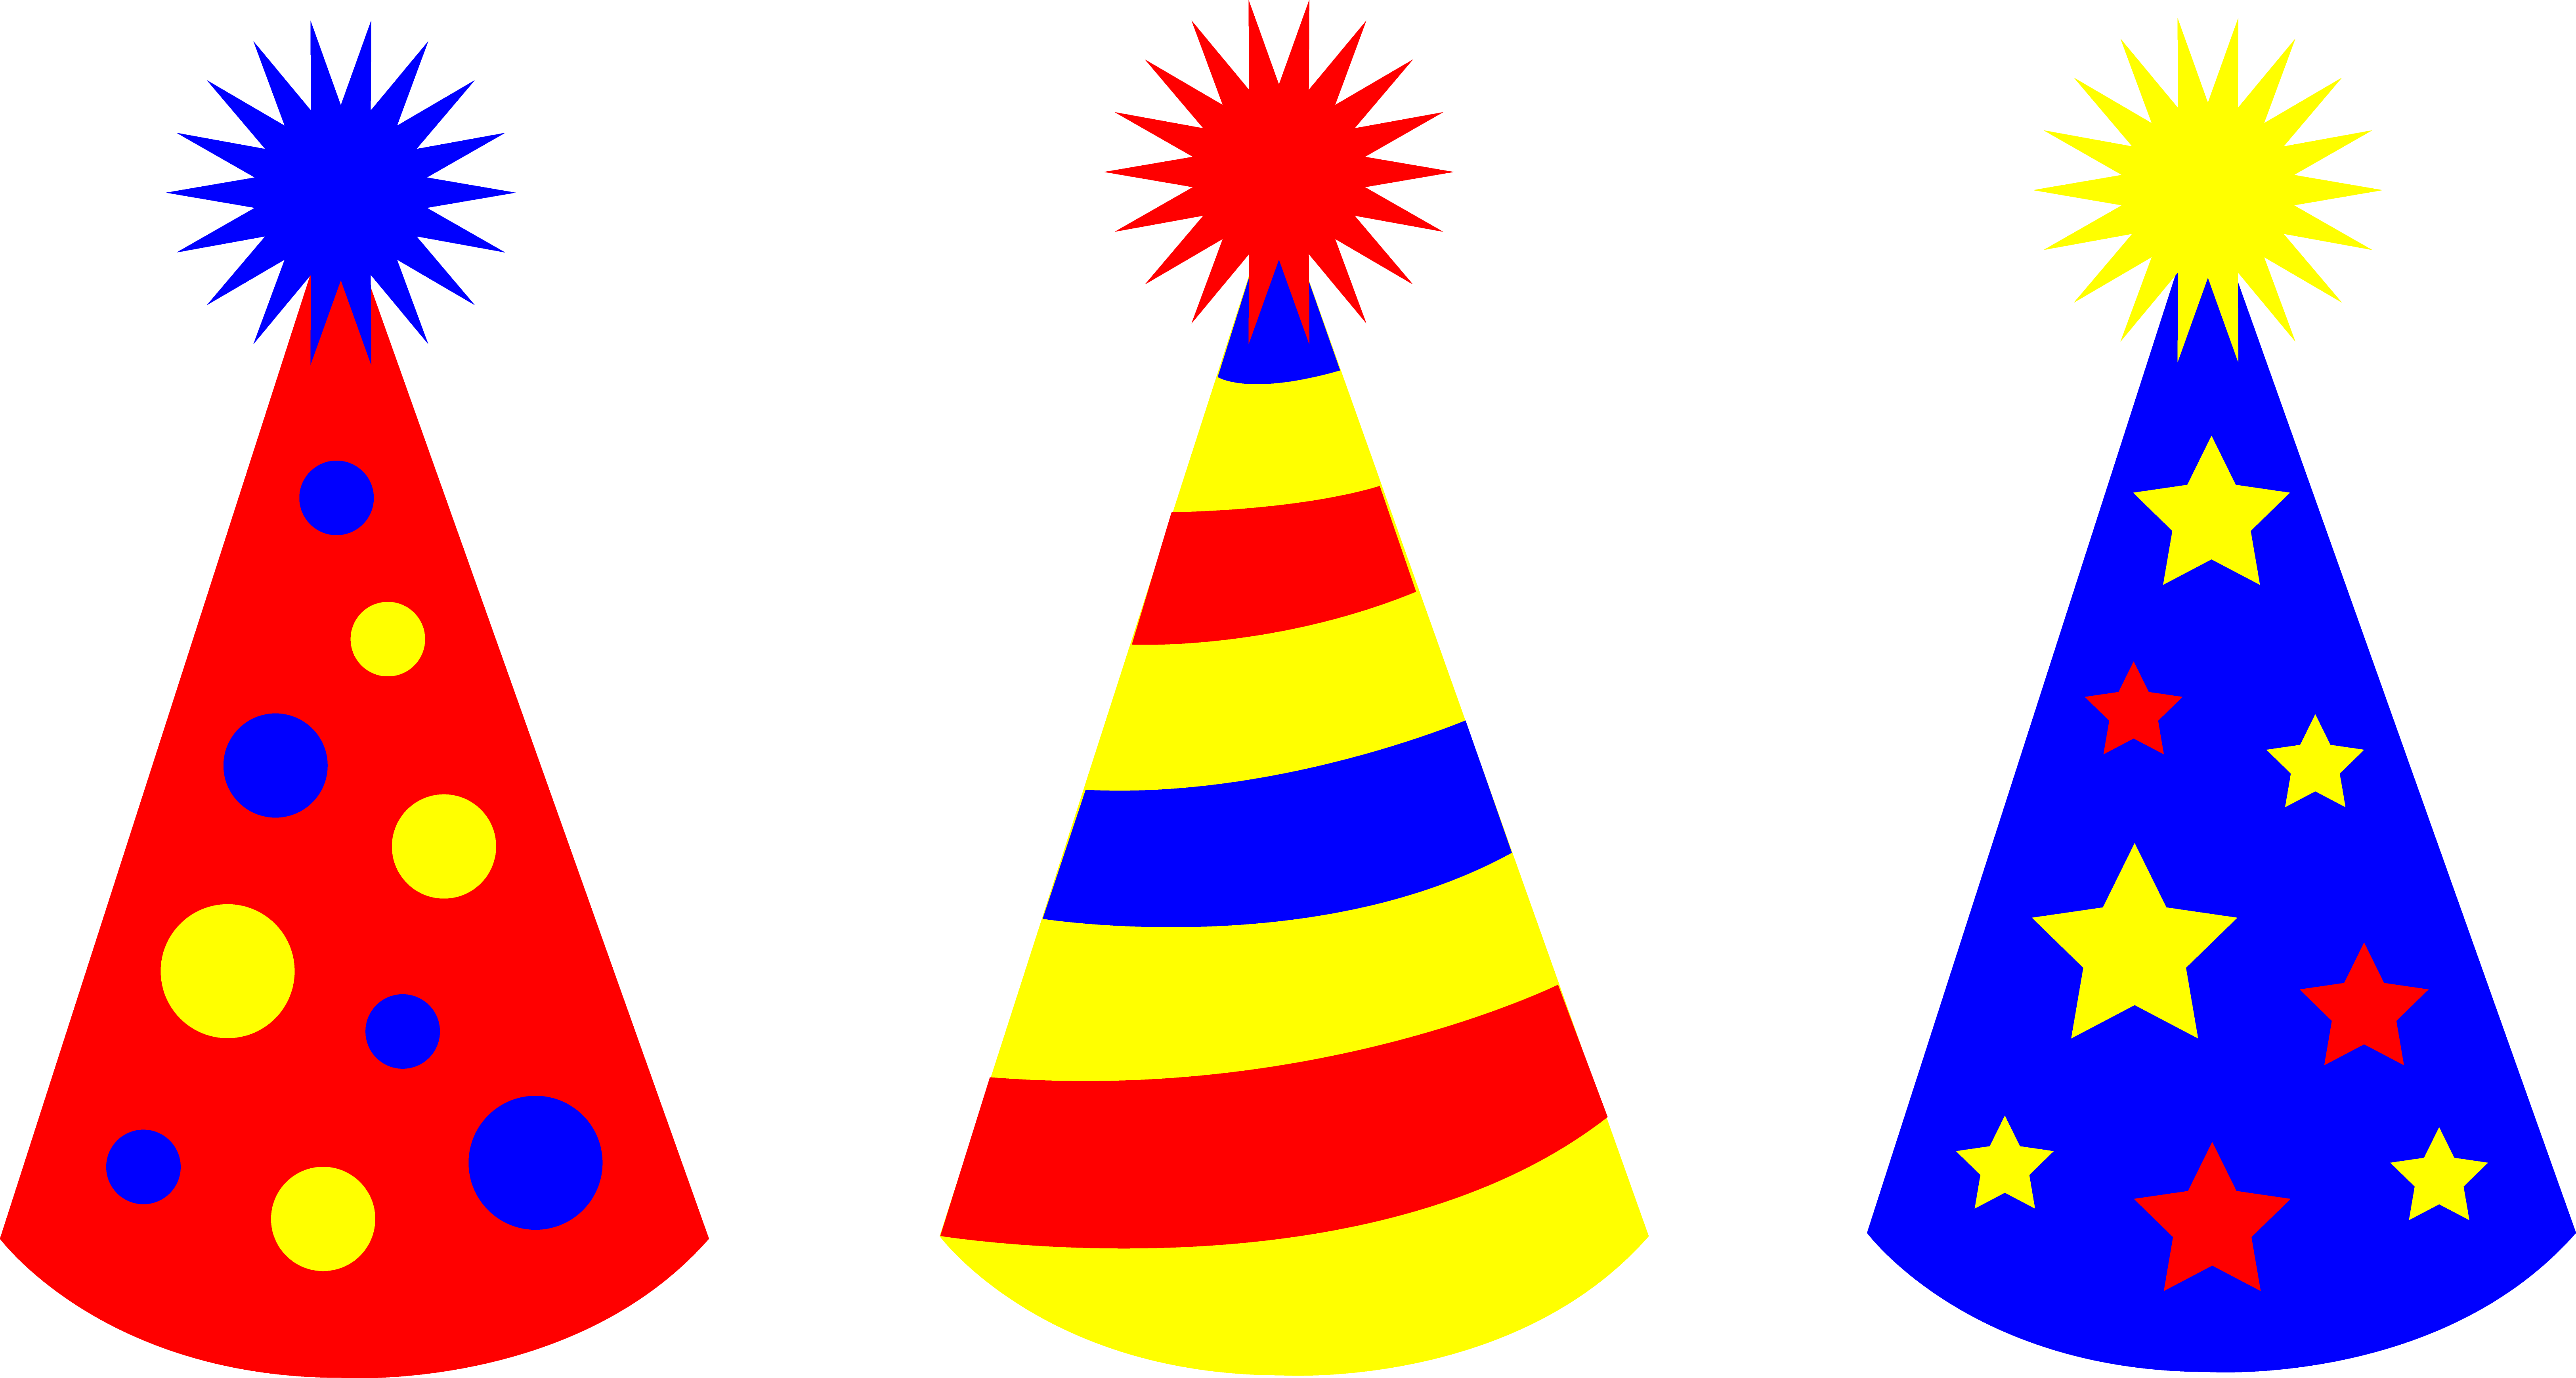 Birthday Hat Clipart - Free Clipart Images